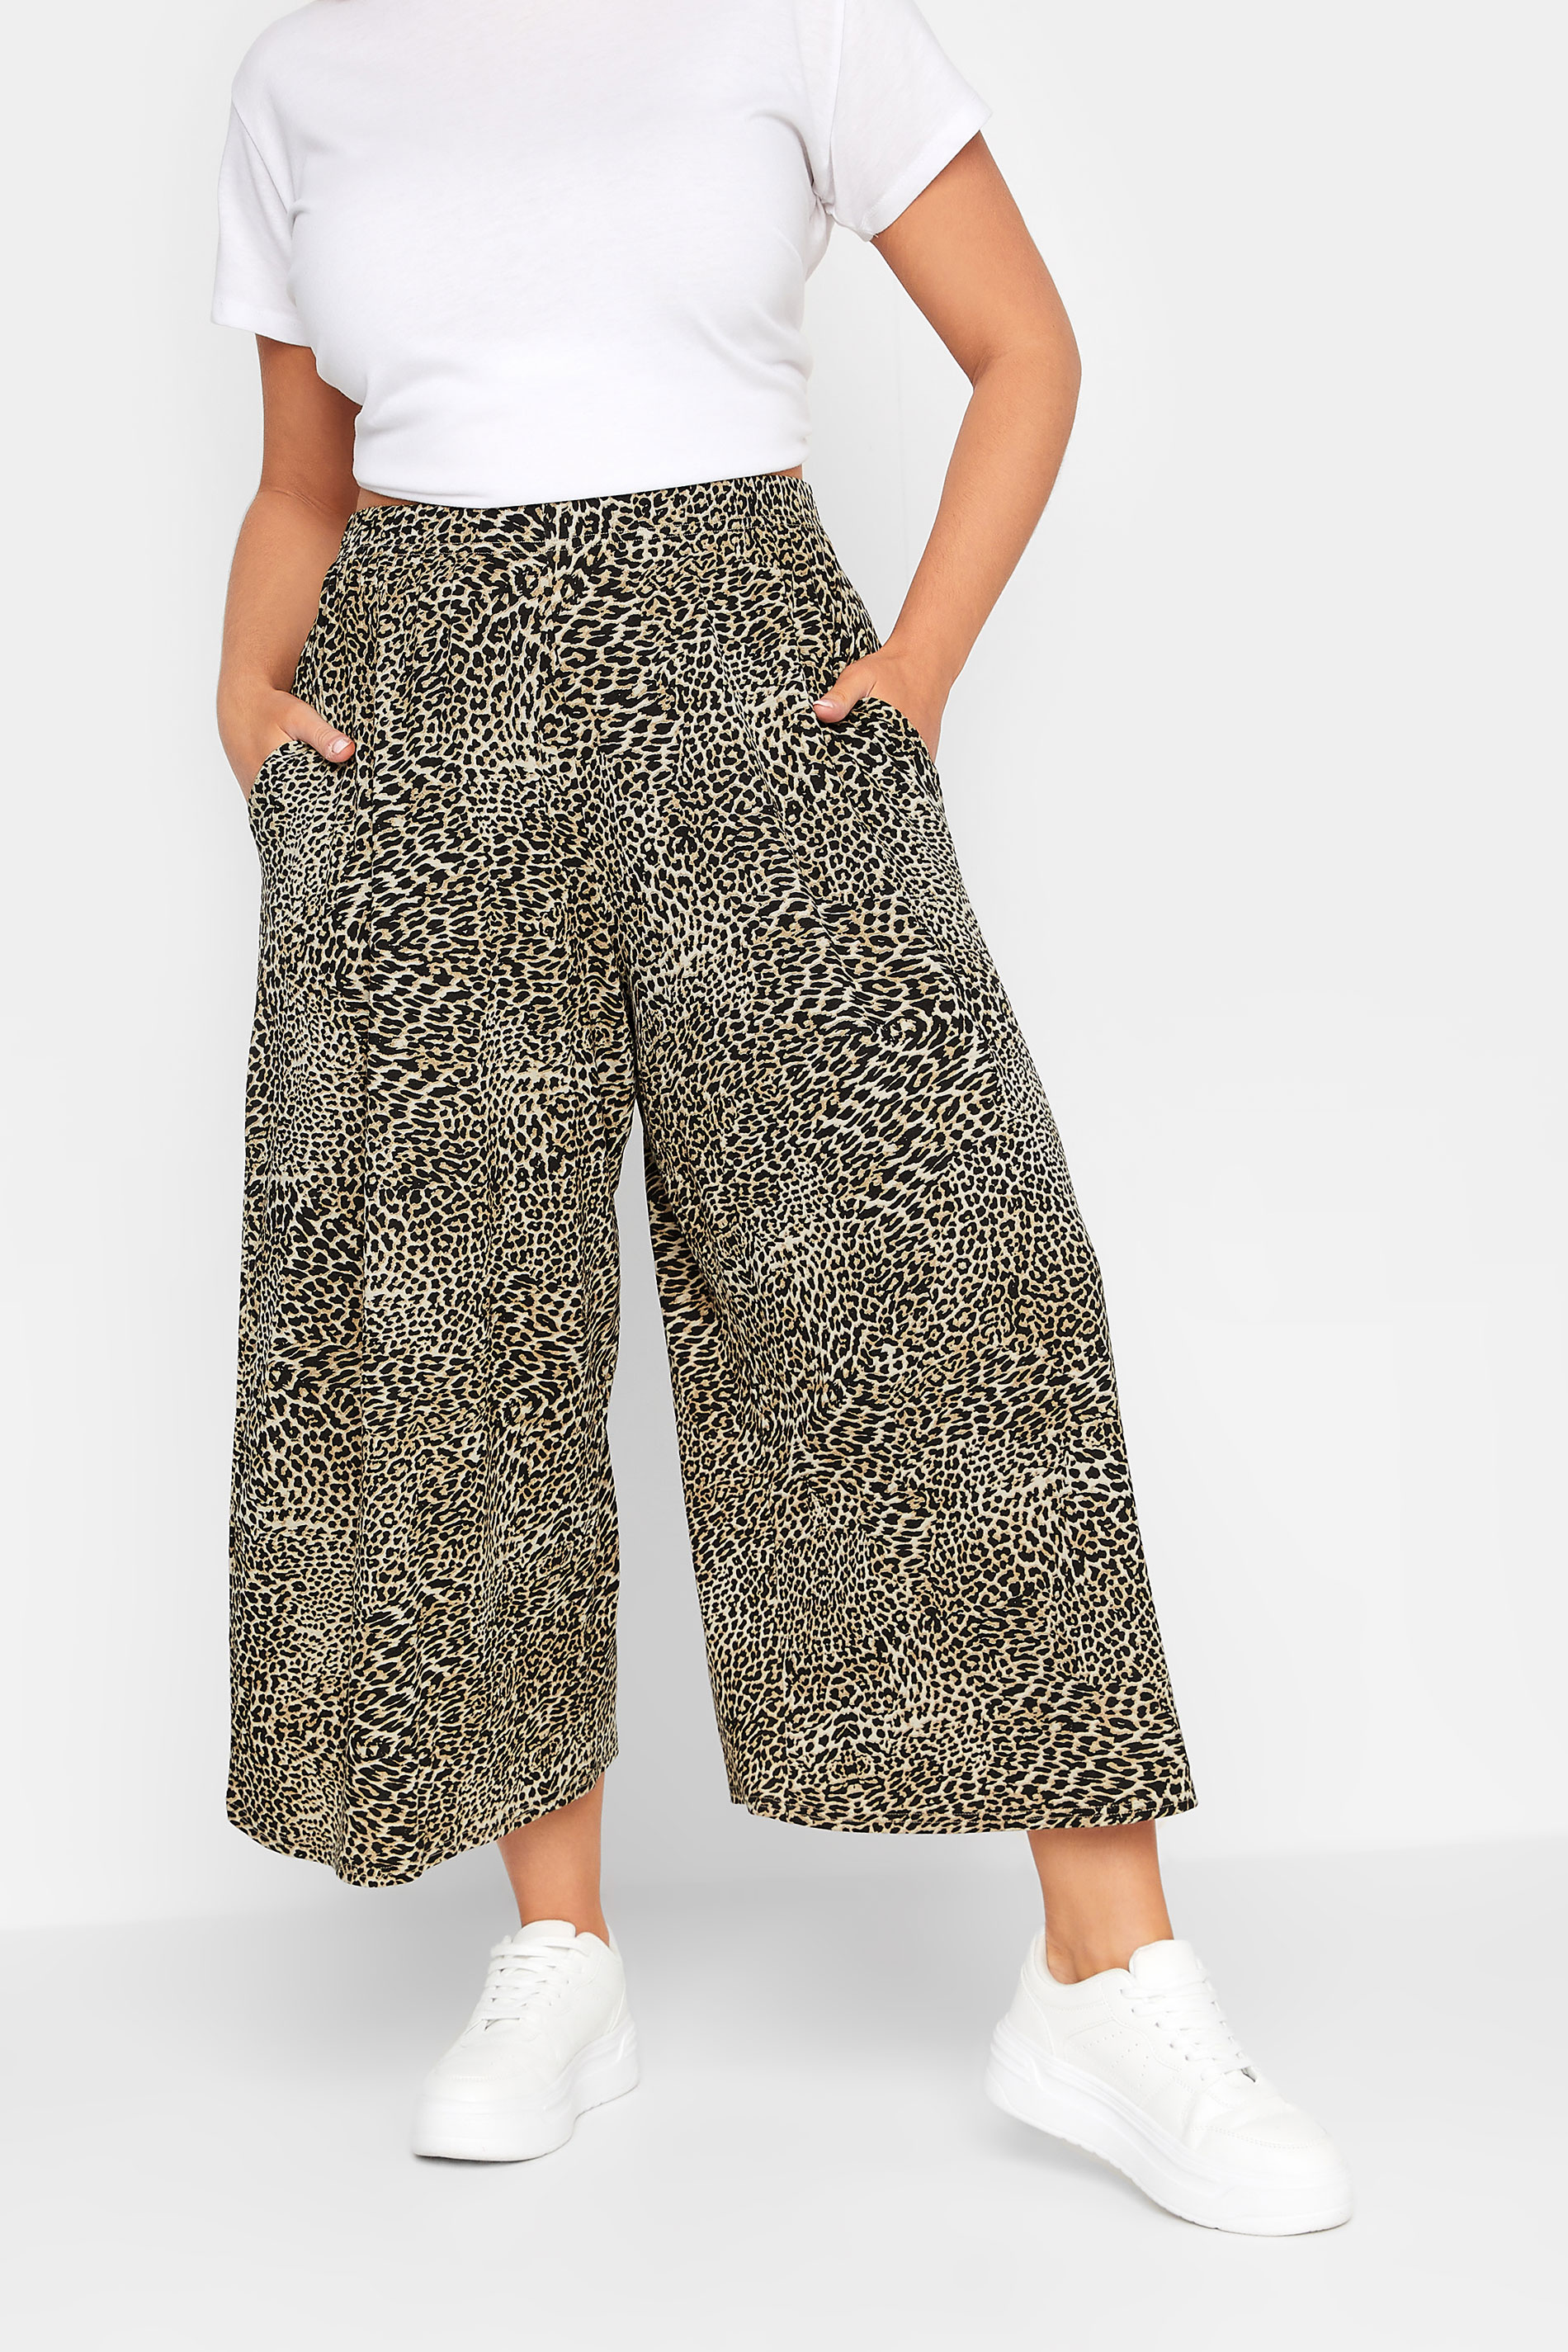 LIMITED COLLECTION Plus Size Black Leopard Print Extra Wide Leg Culottes | Yours Clothing  2